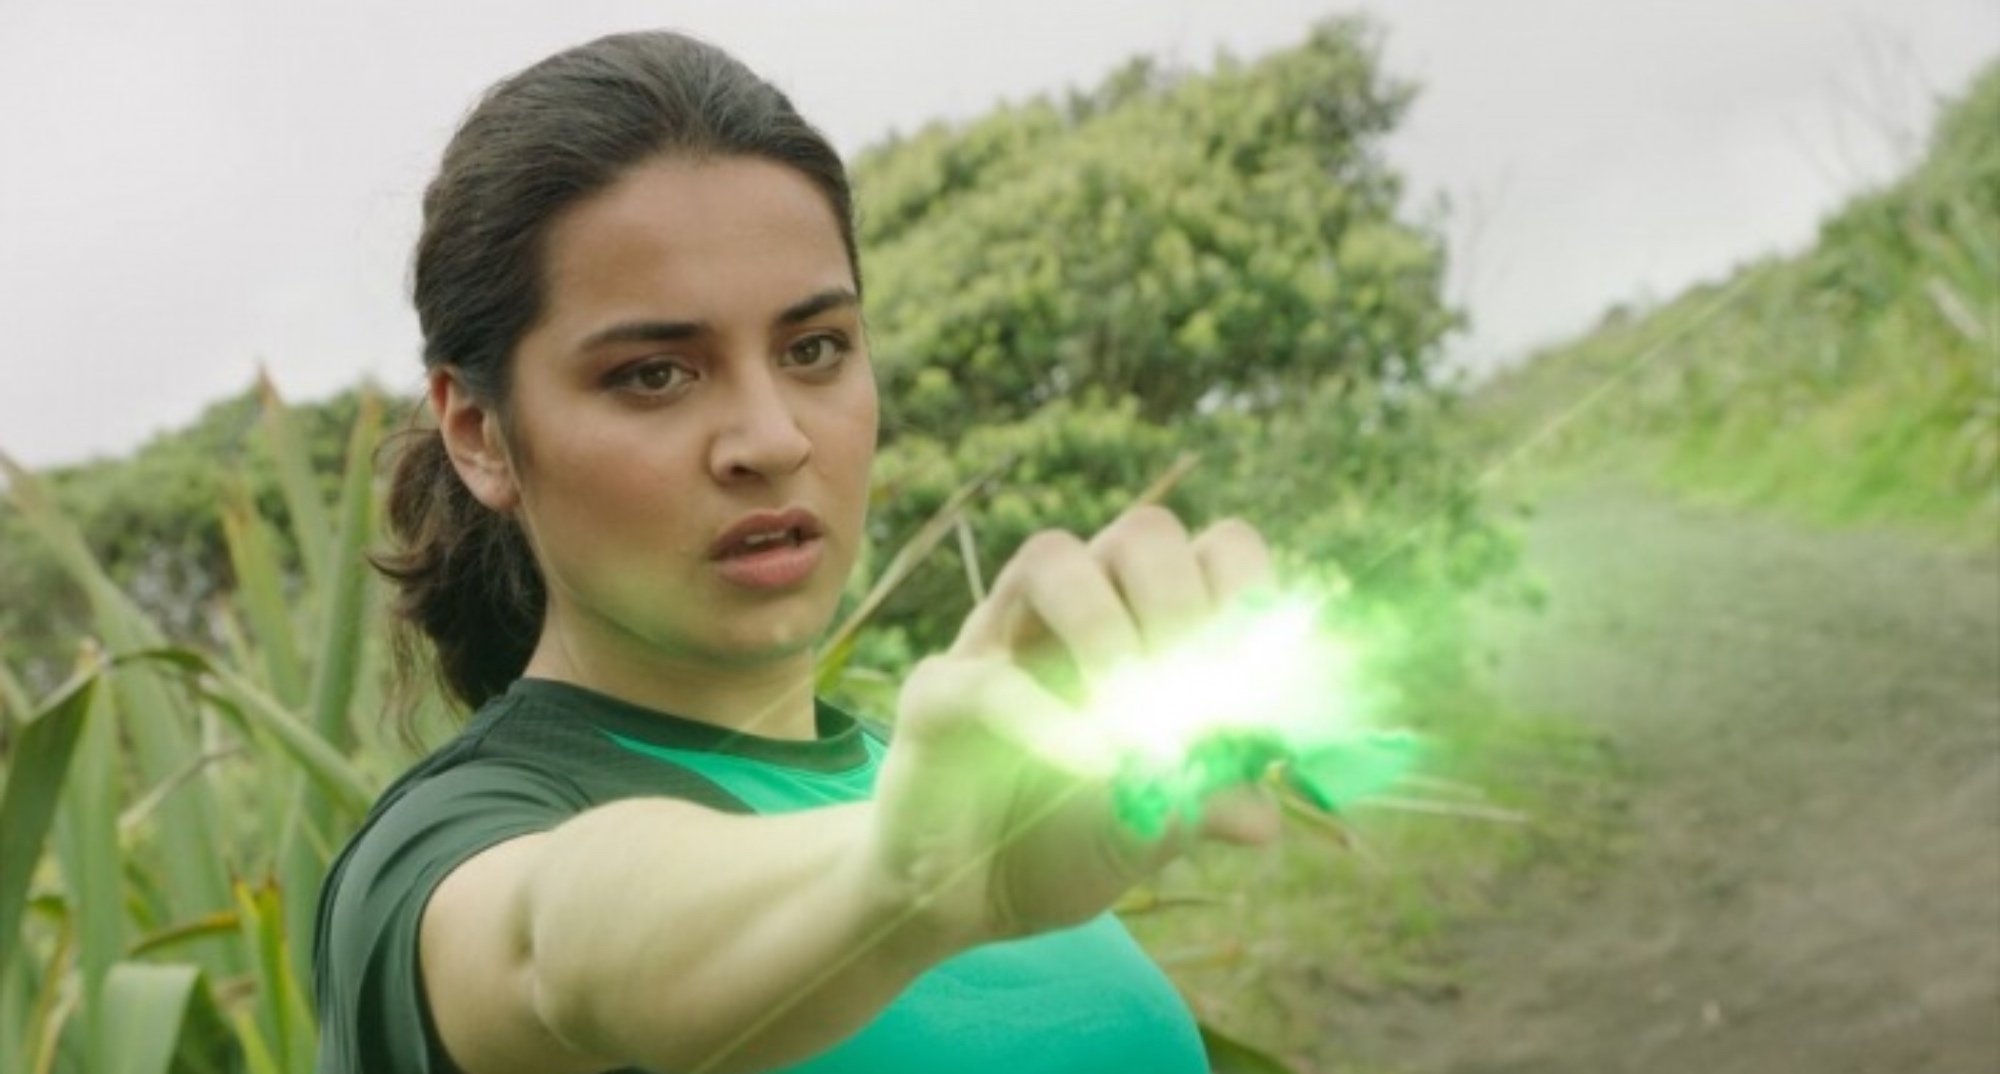 LGBTQ character Izzy in 'Power Rangers Dino Fury' holding green power crystal.